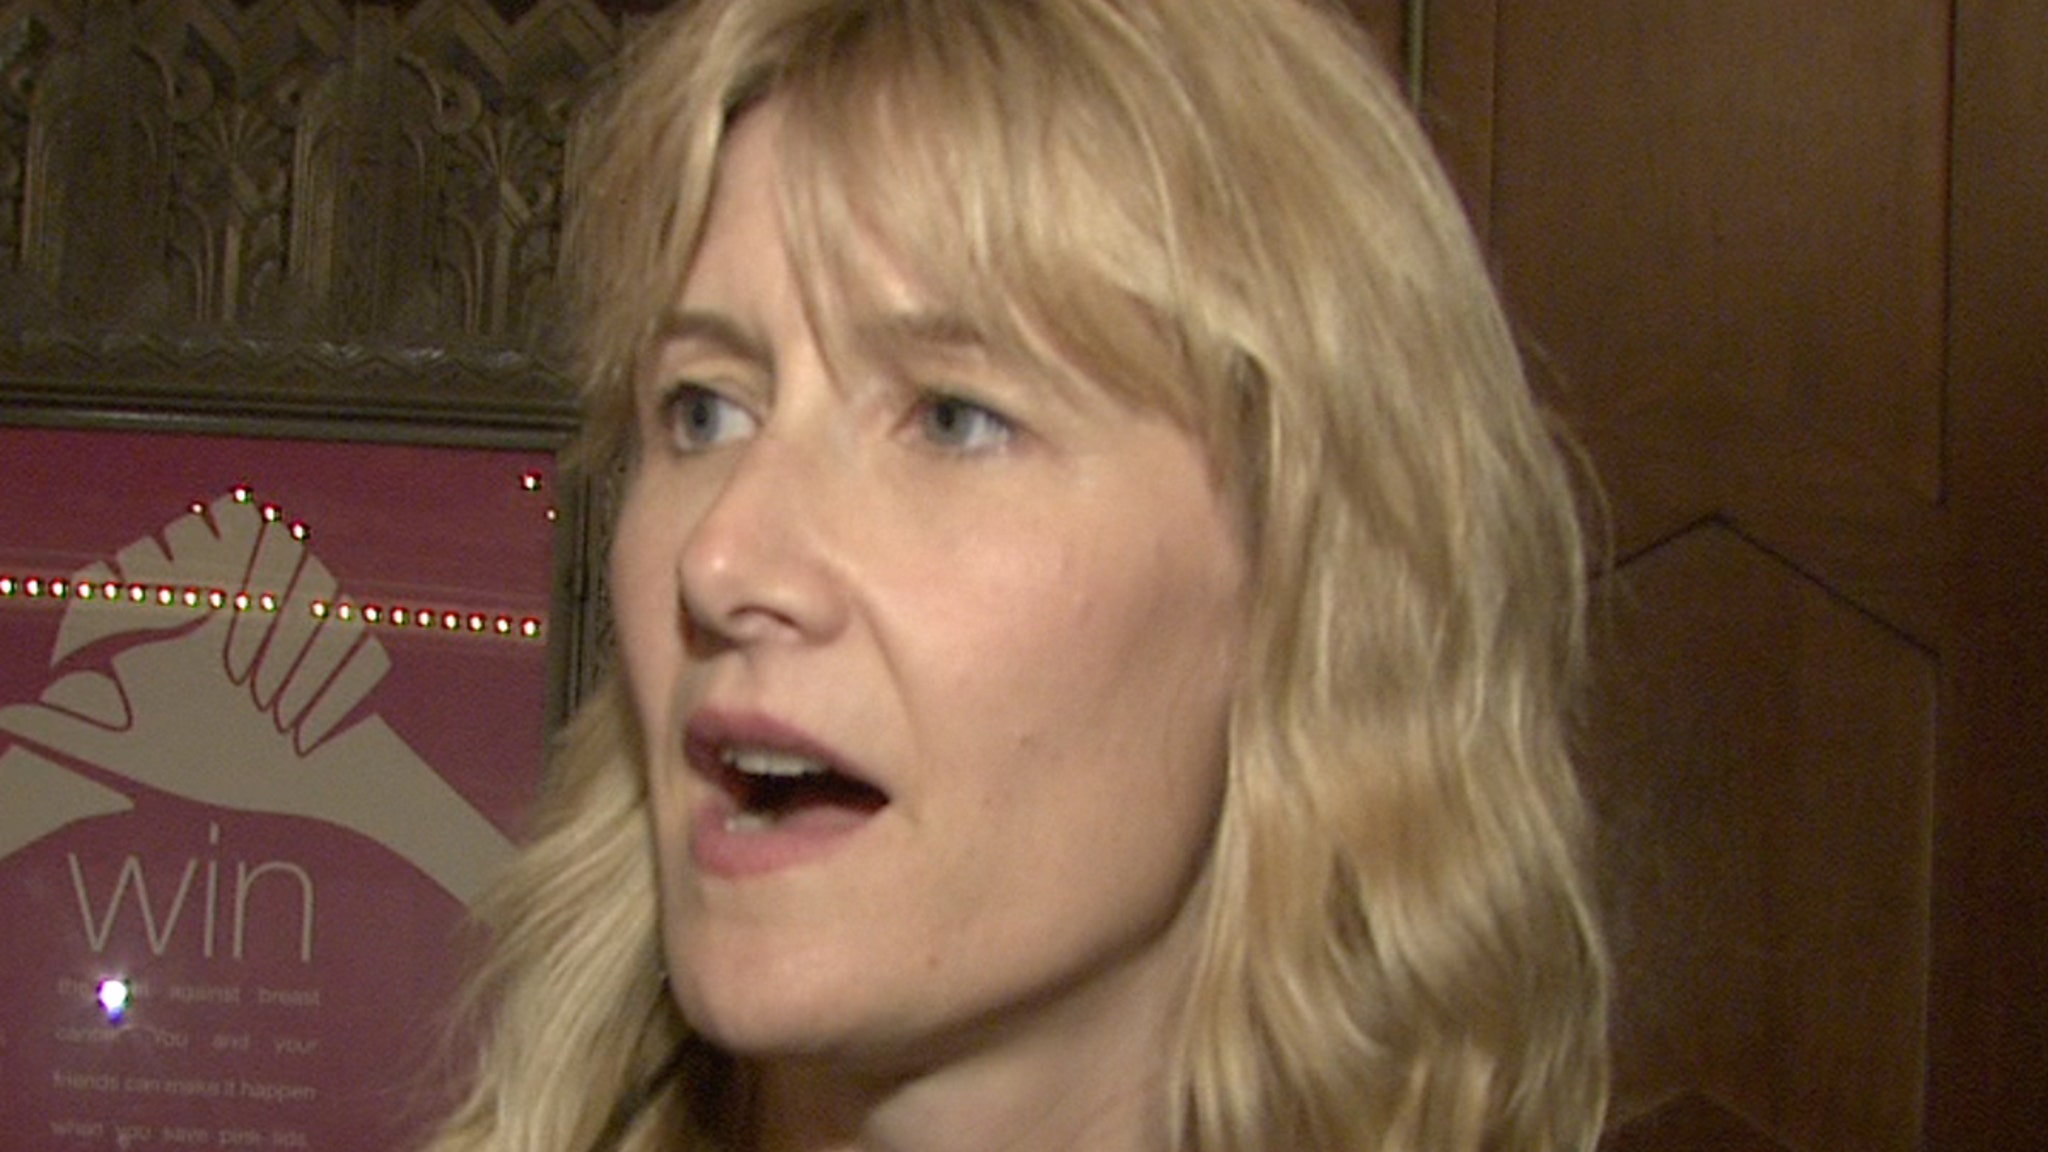 Laura Dern Reveals She Was Only 23 Years Old in Original 'Jurassic Park'